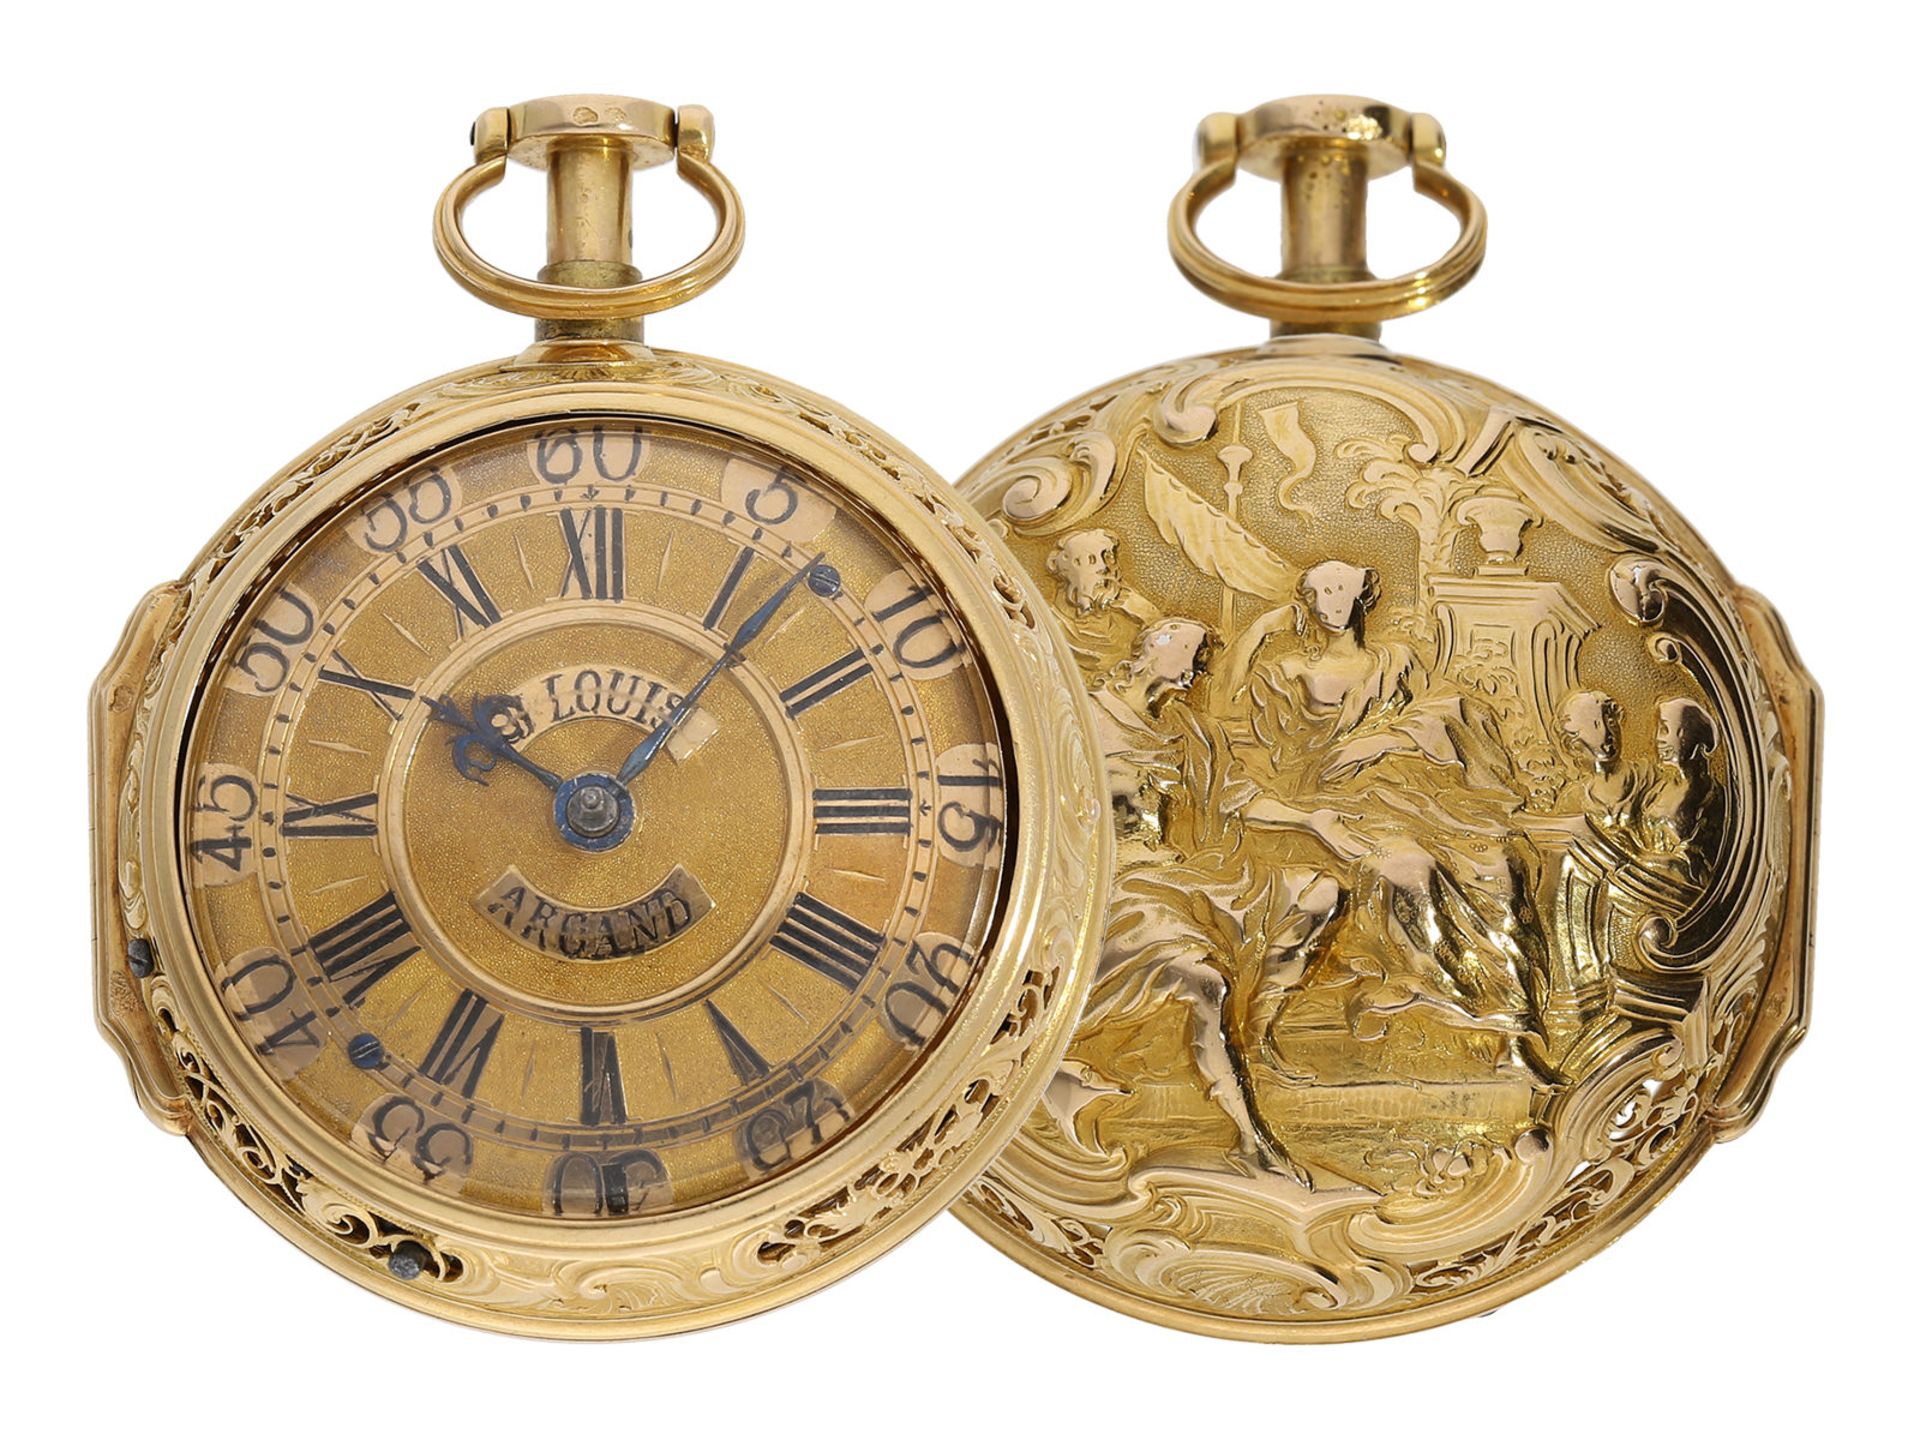 Pocket watch: extremely fine pair case verge pocket watch with quarter-hour repeater and 20K